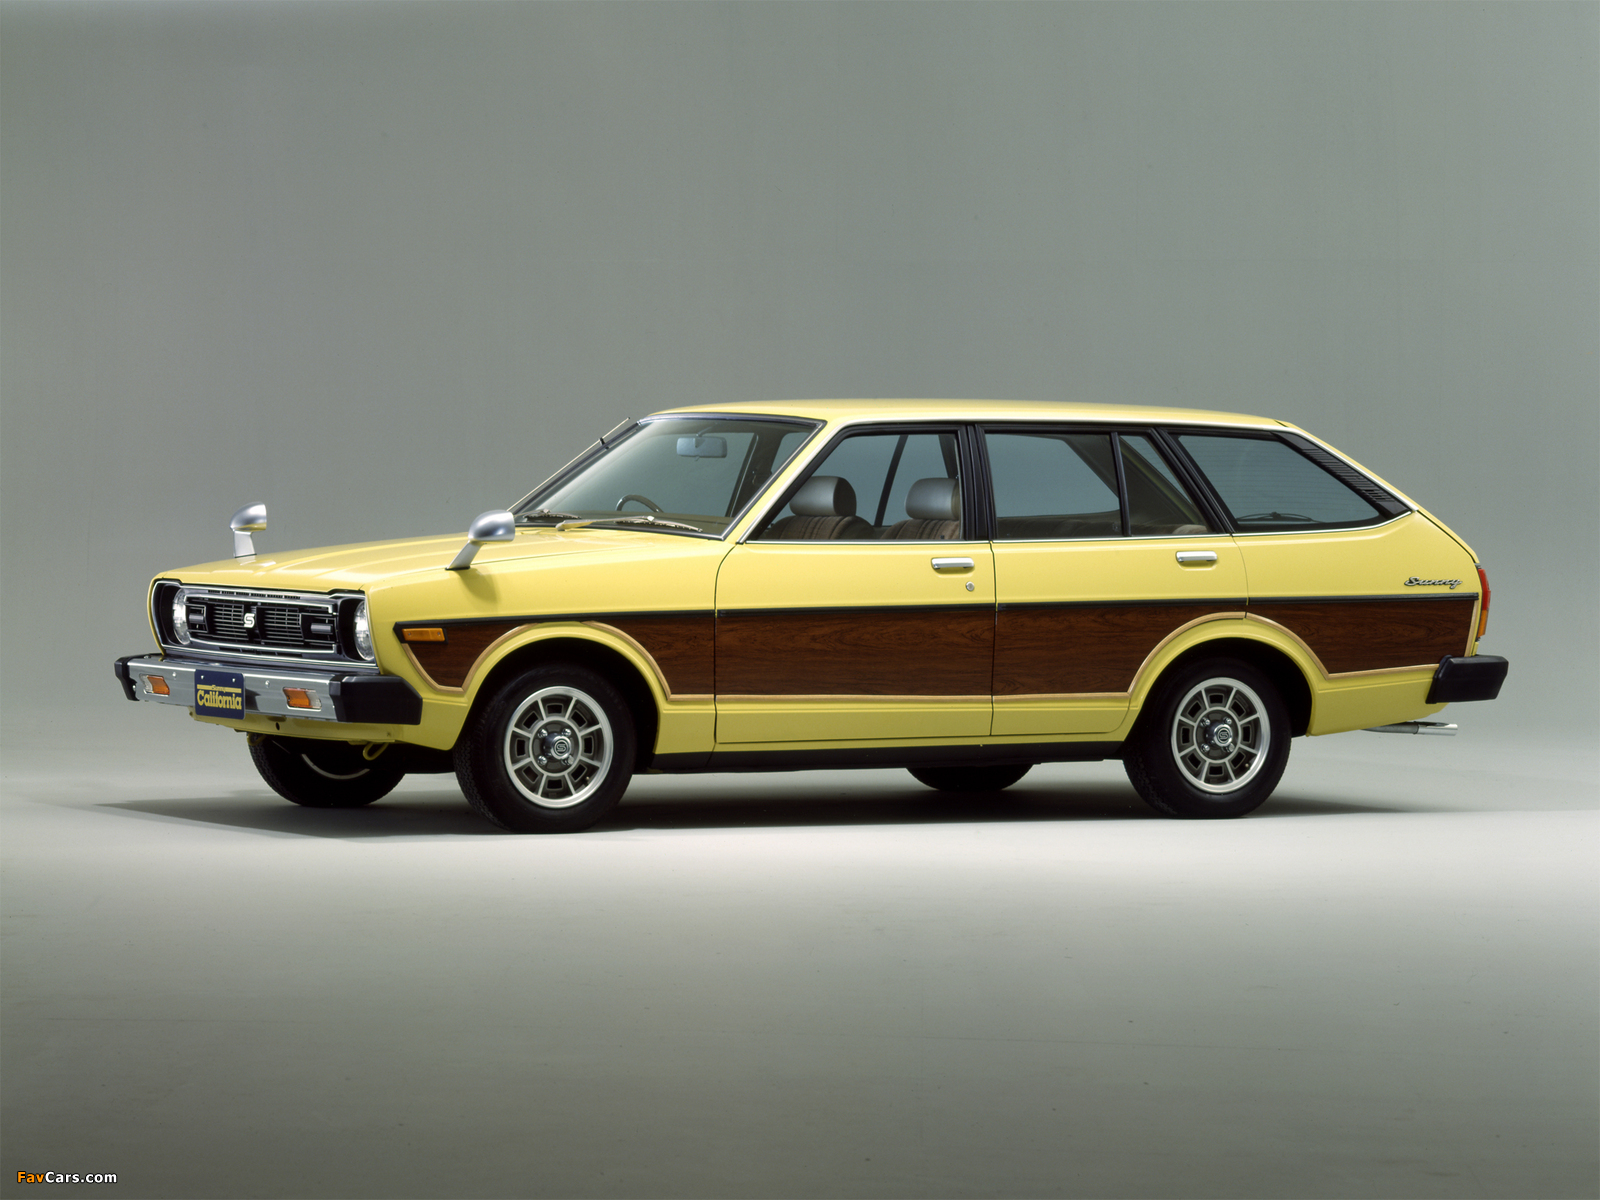 Images of Nissan Sunny California (B 310) 1979 (1600 x 1200)